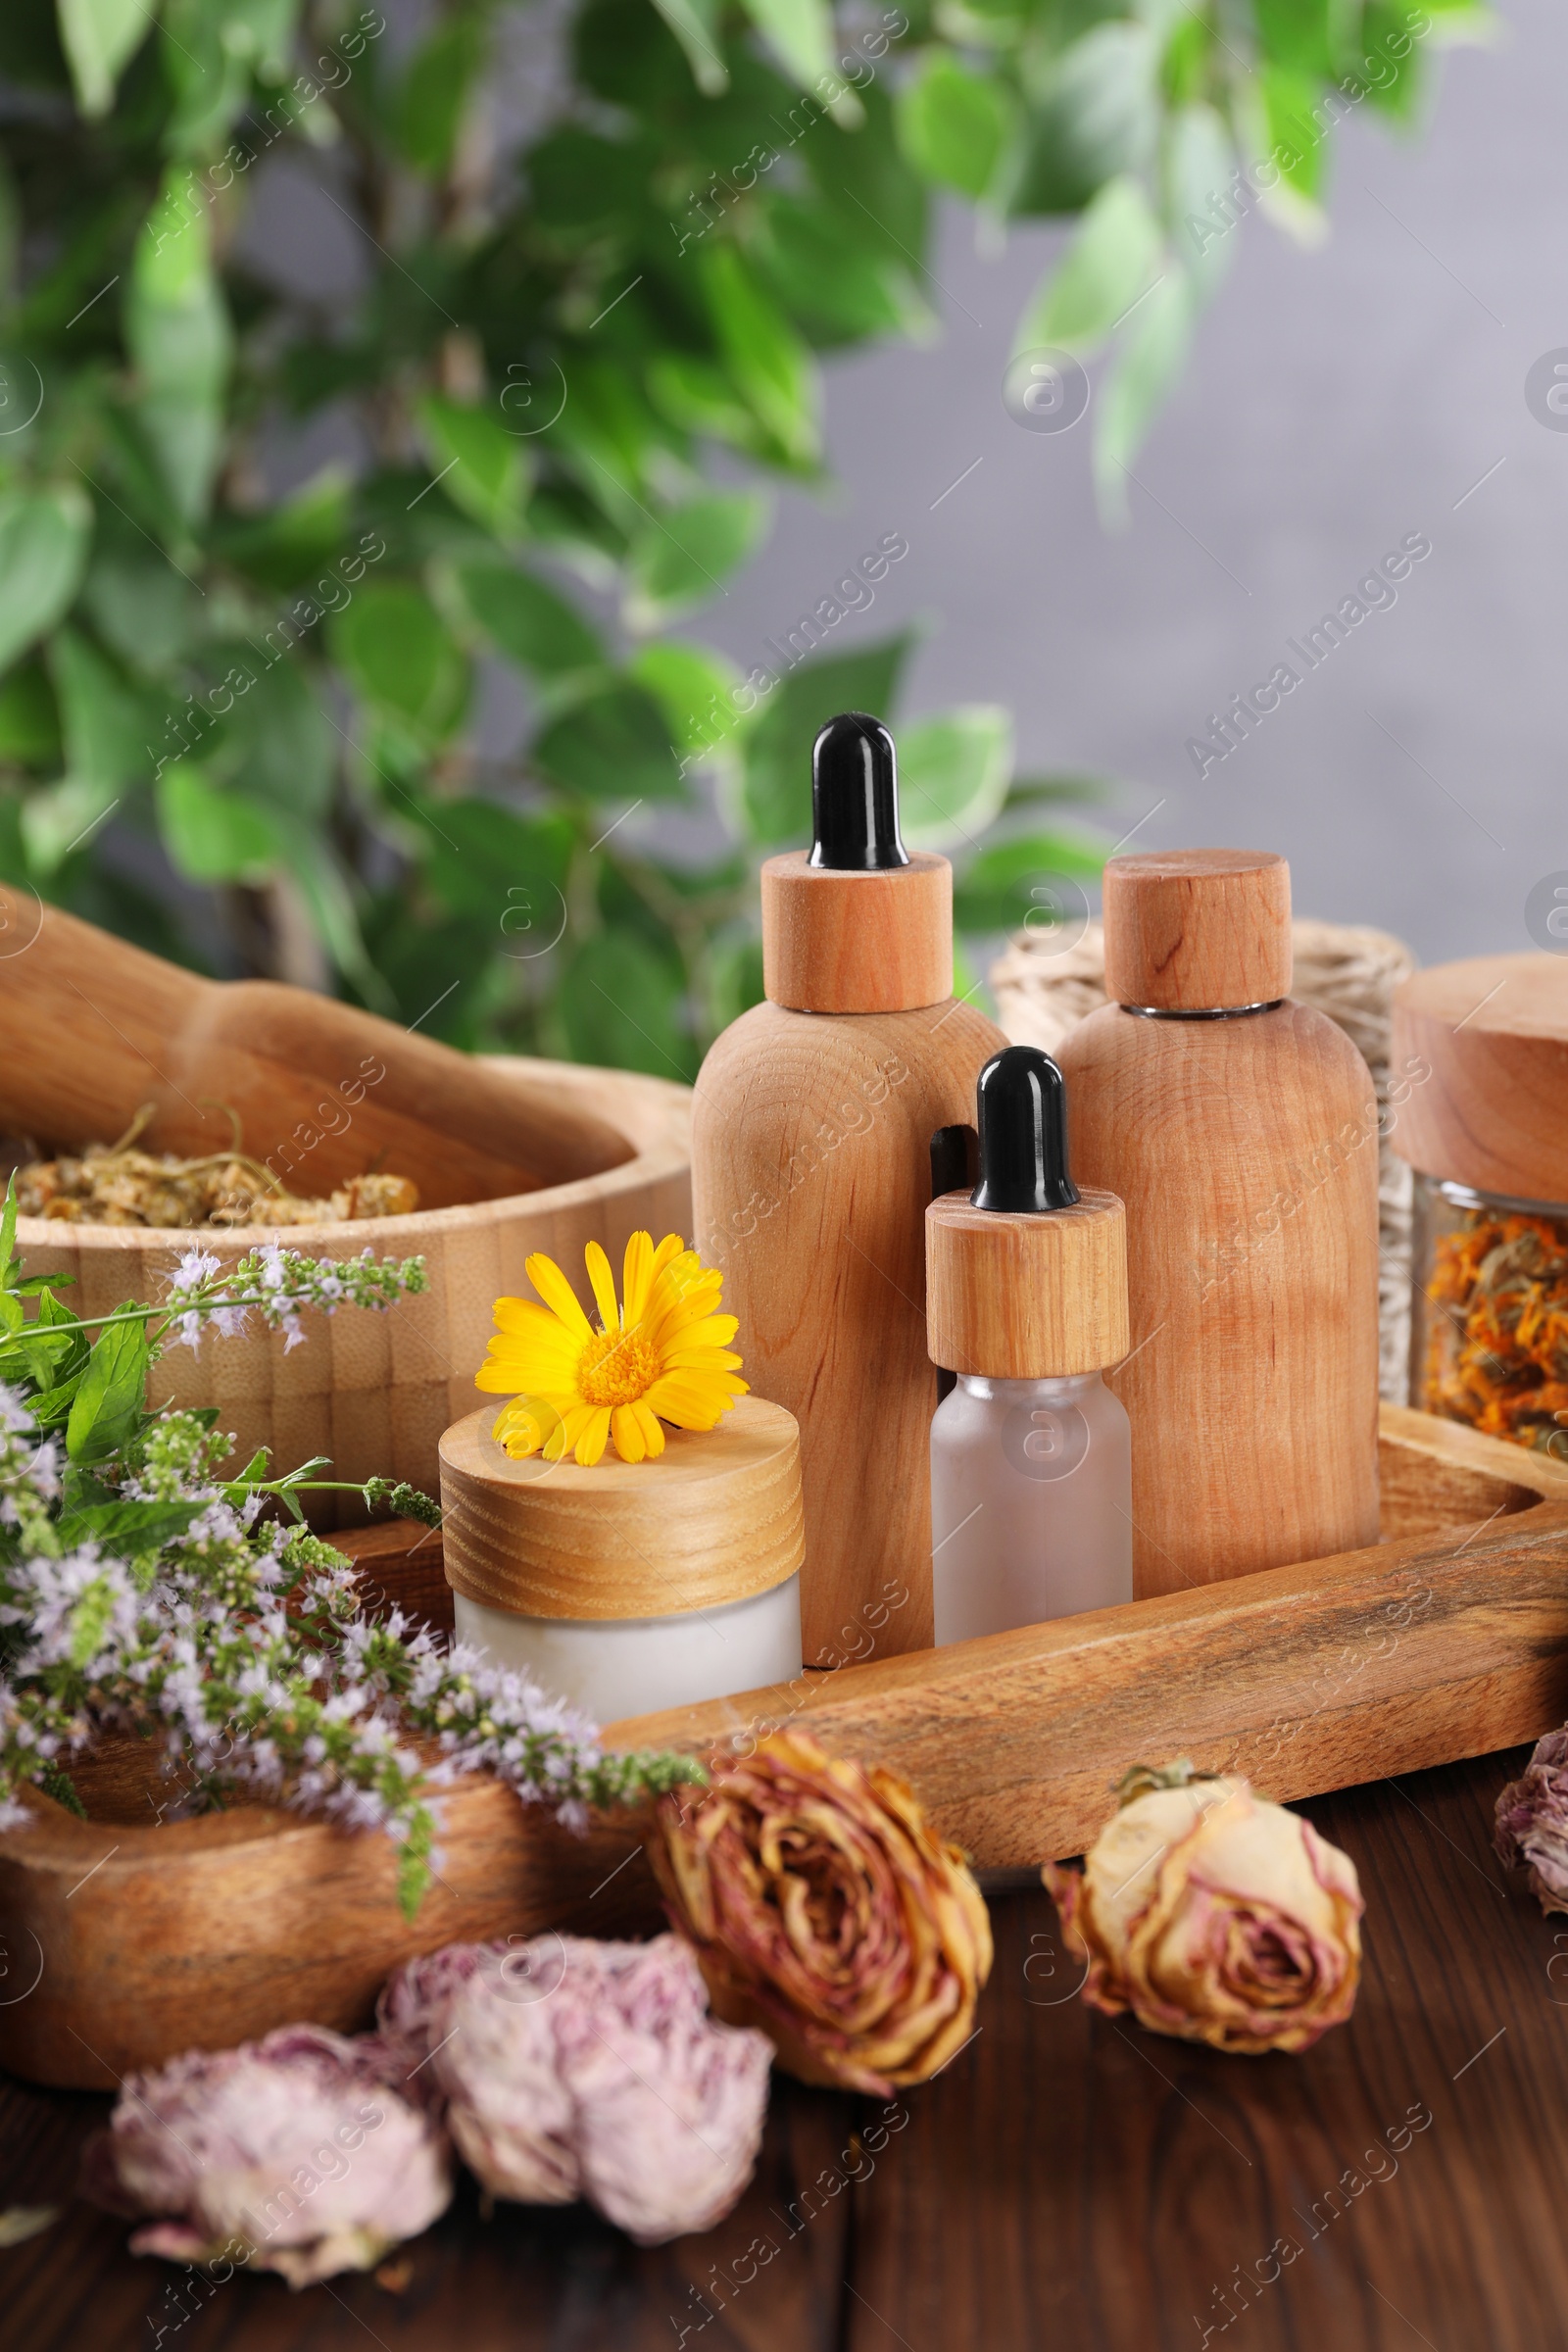 Photo of Jar, bottles of essential oils and different herbs on wooden table